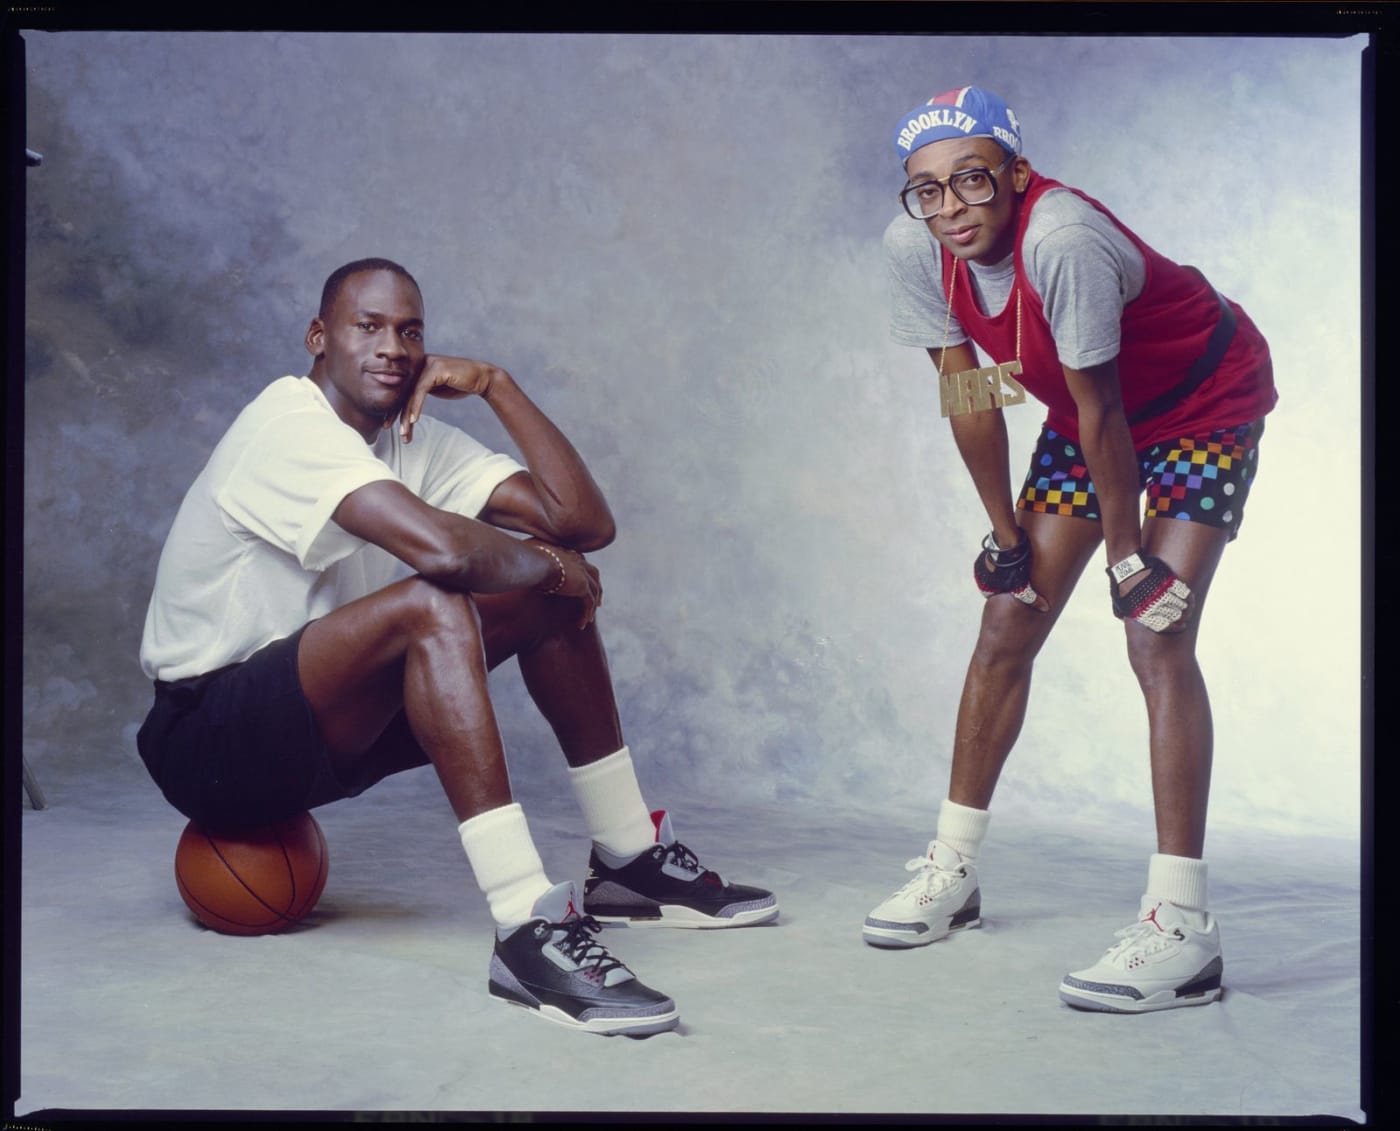 Michael Jordan and Spike Lee on the set of their first Nike commercial shoot.